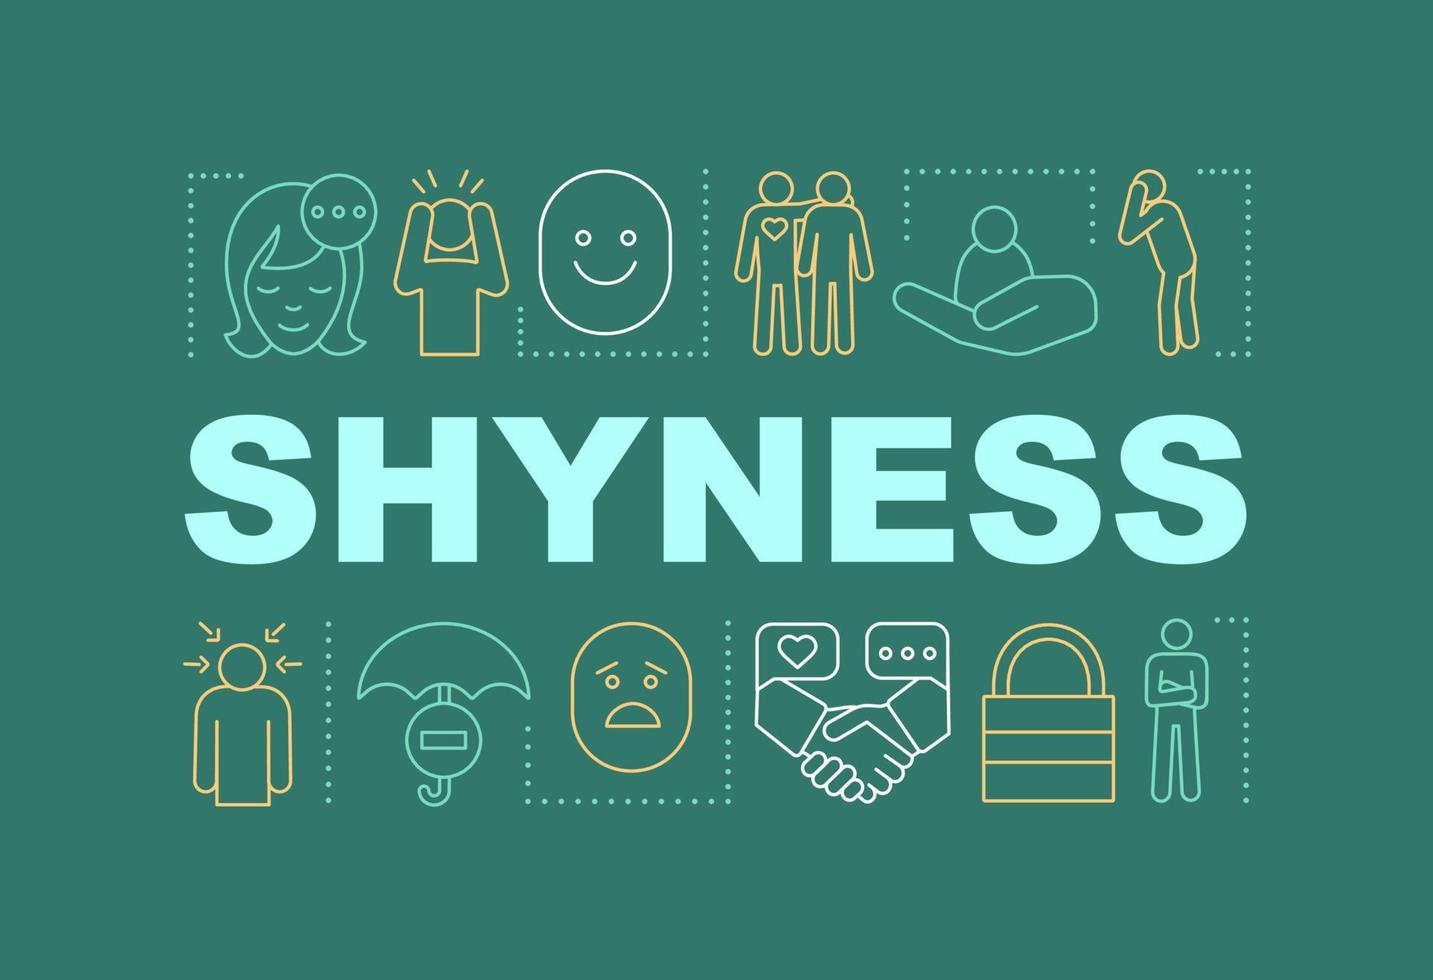 Shyness word concepts banner. Bashfulness, awkward. Lack of confidence. Presentation, website. Isolated lettering typography idea, linear icons. Panic, depression. Vector outline illustration